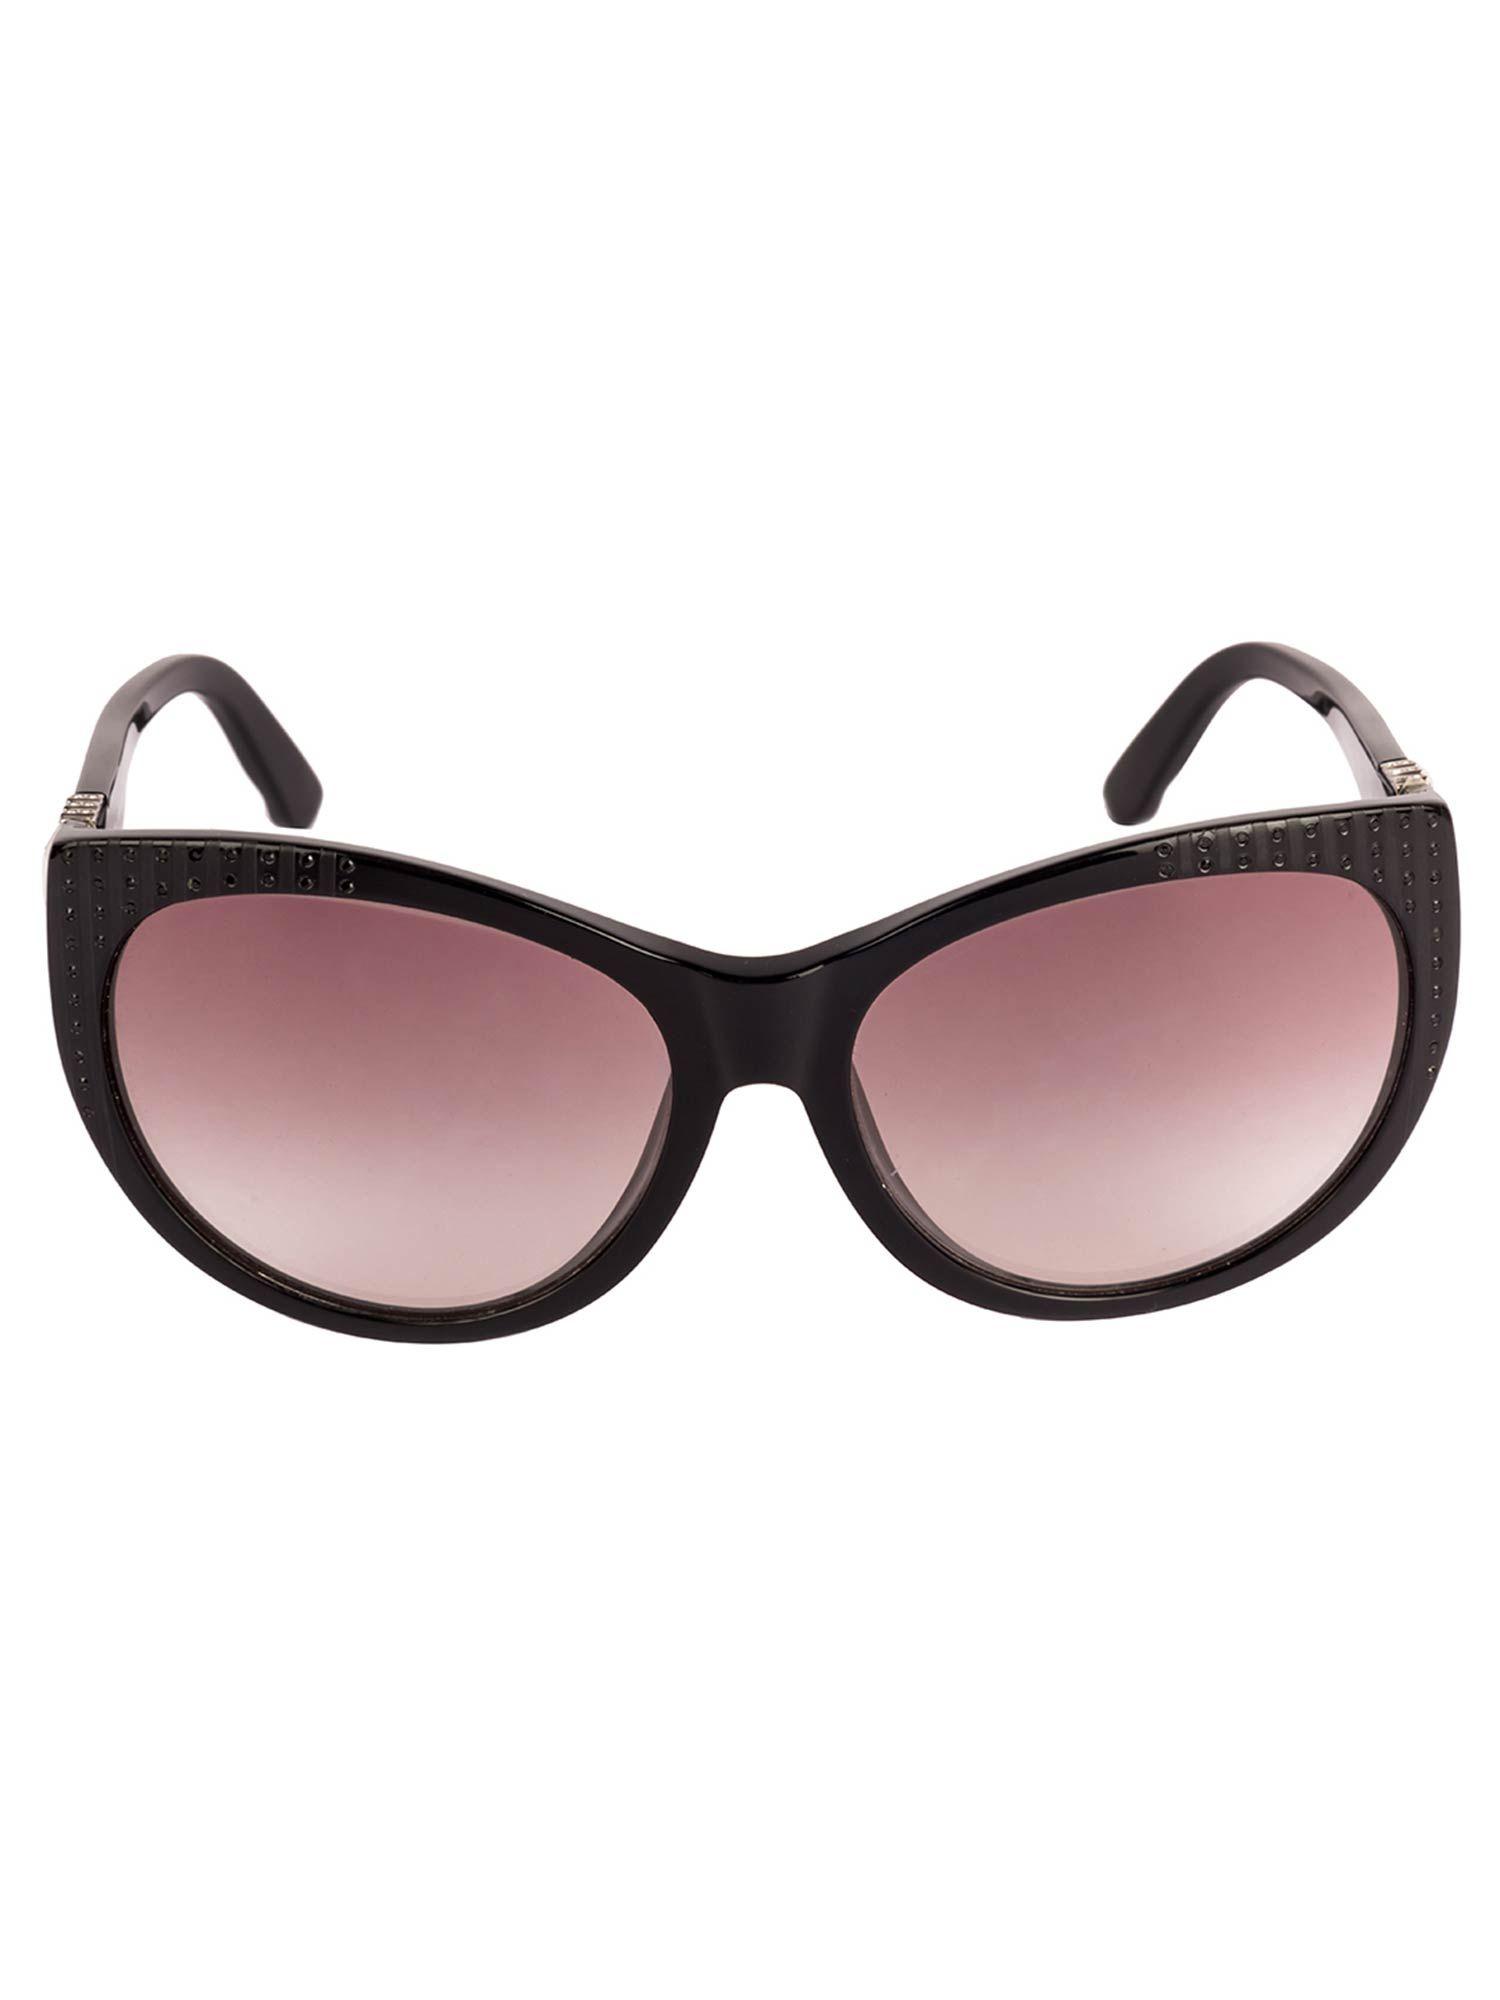 Oval Sunglasses with Brown Lens for Women